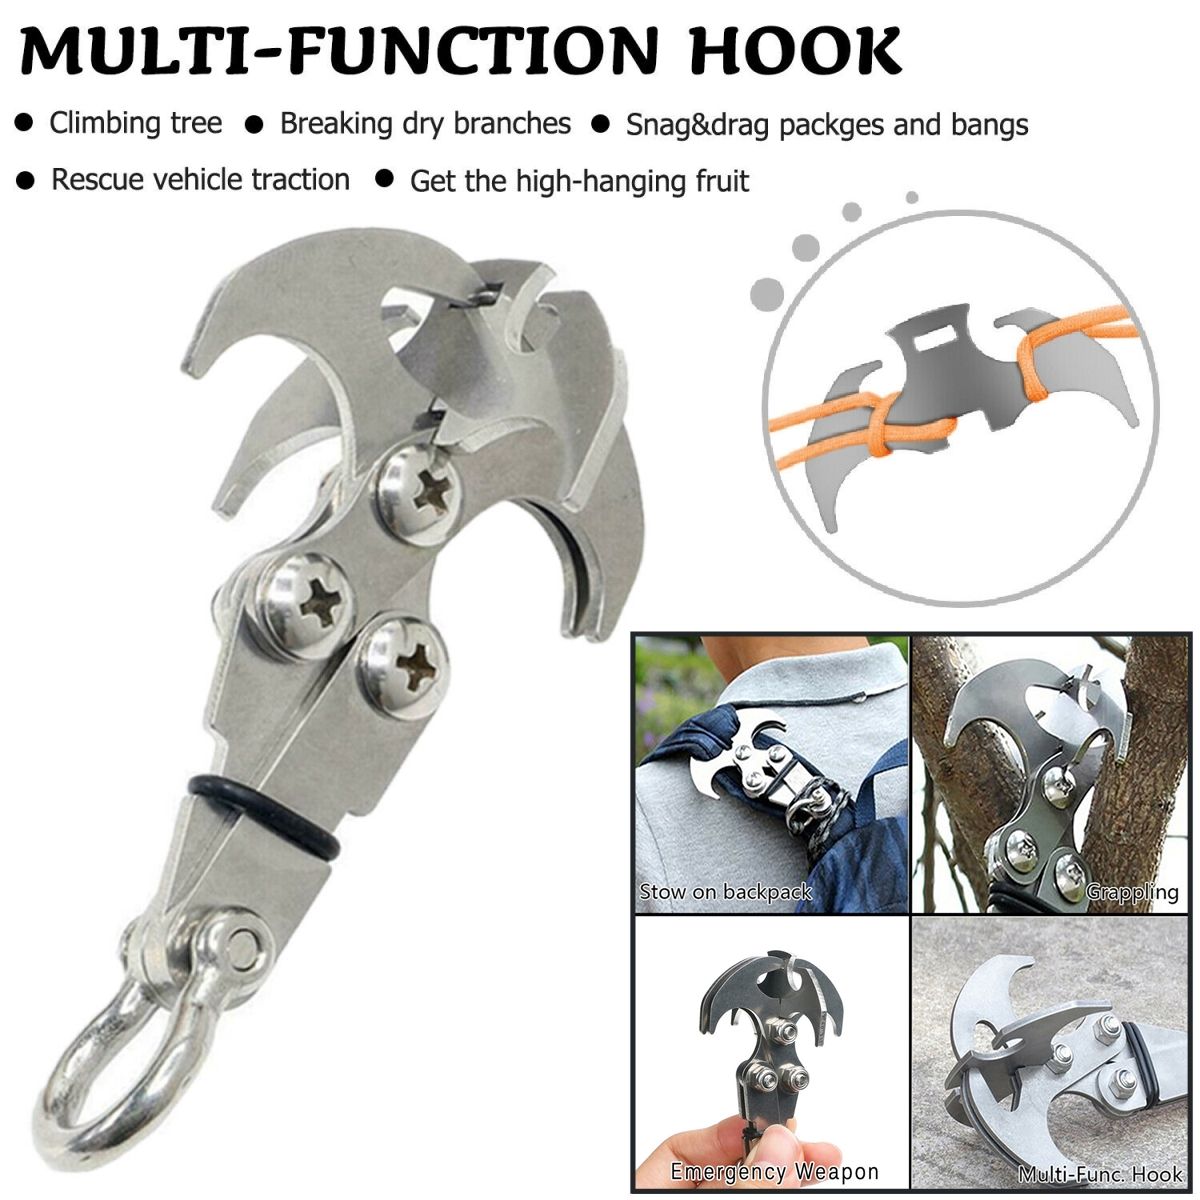 304-Stainless-Steel-Climbing-Claw-Gravity-Grappling-Hooks-Survival-Grappling-Tool-1624229